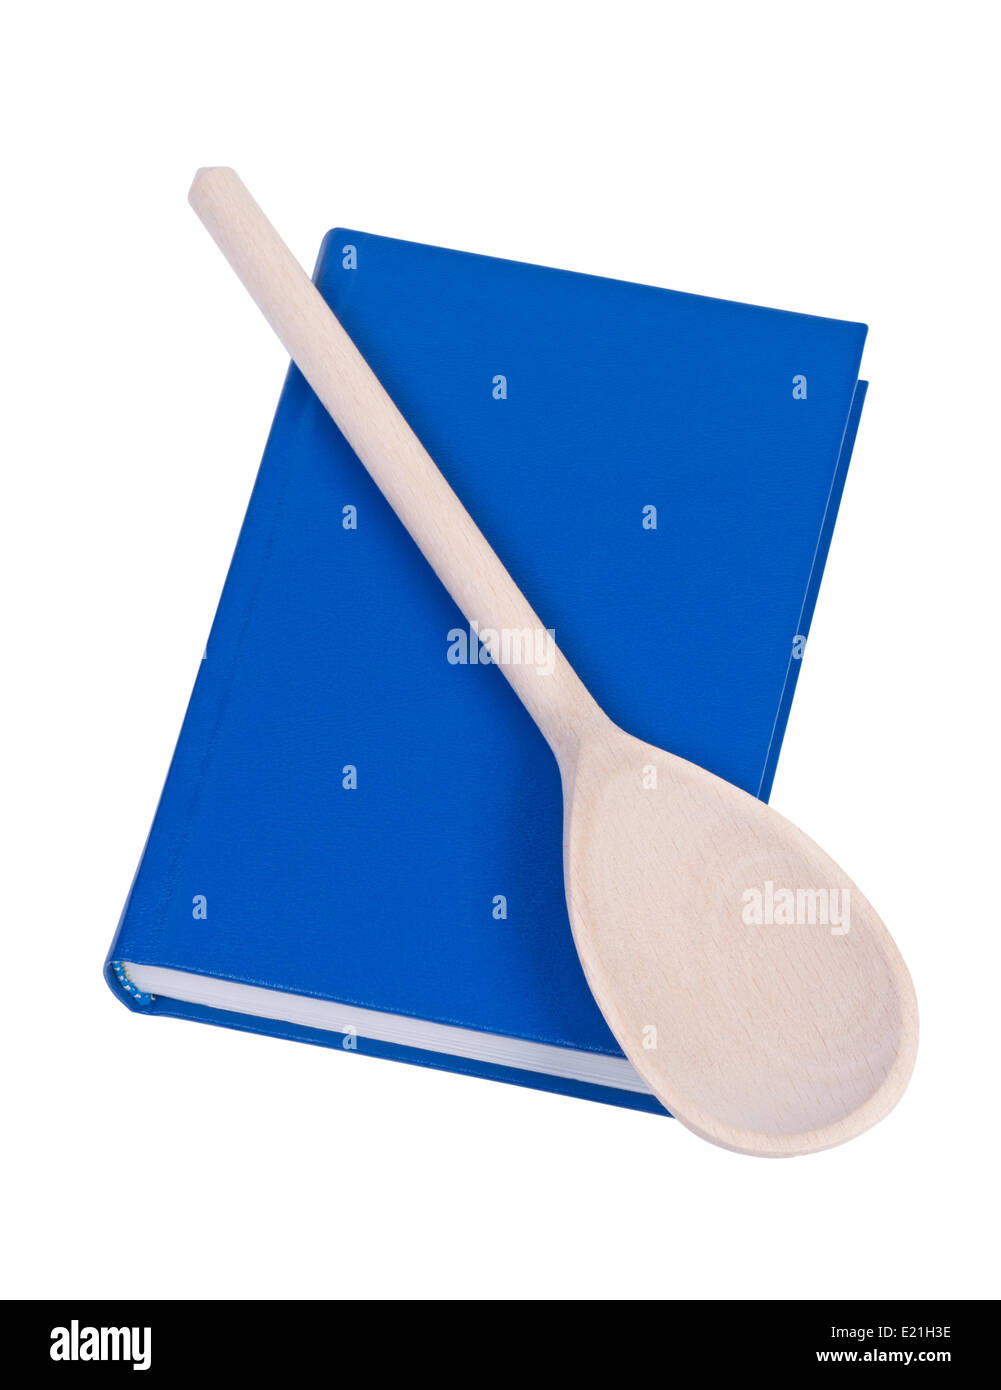 Book wit wooden spoon above. Stock Photo